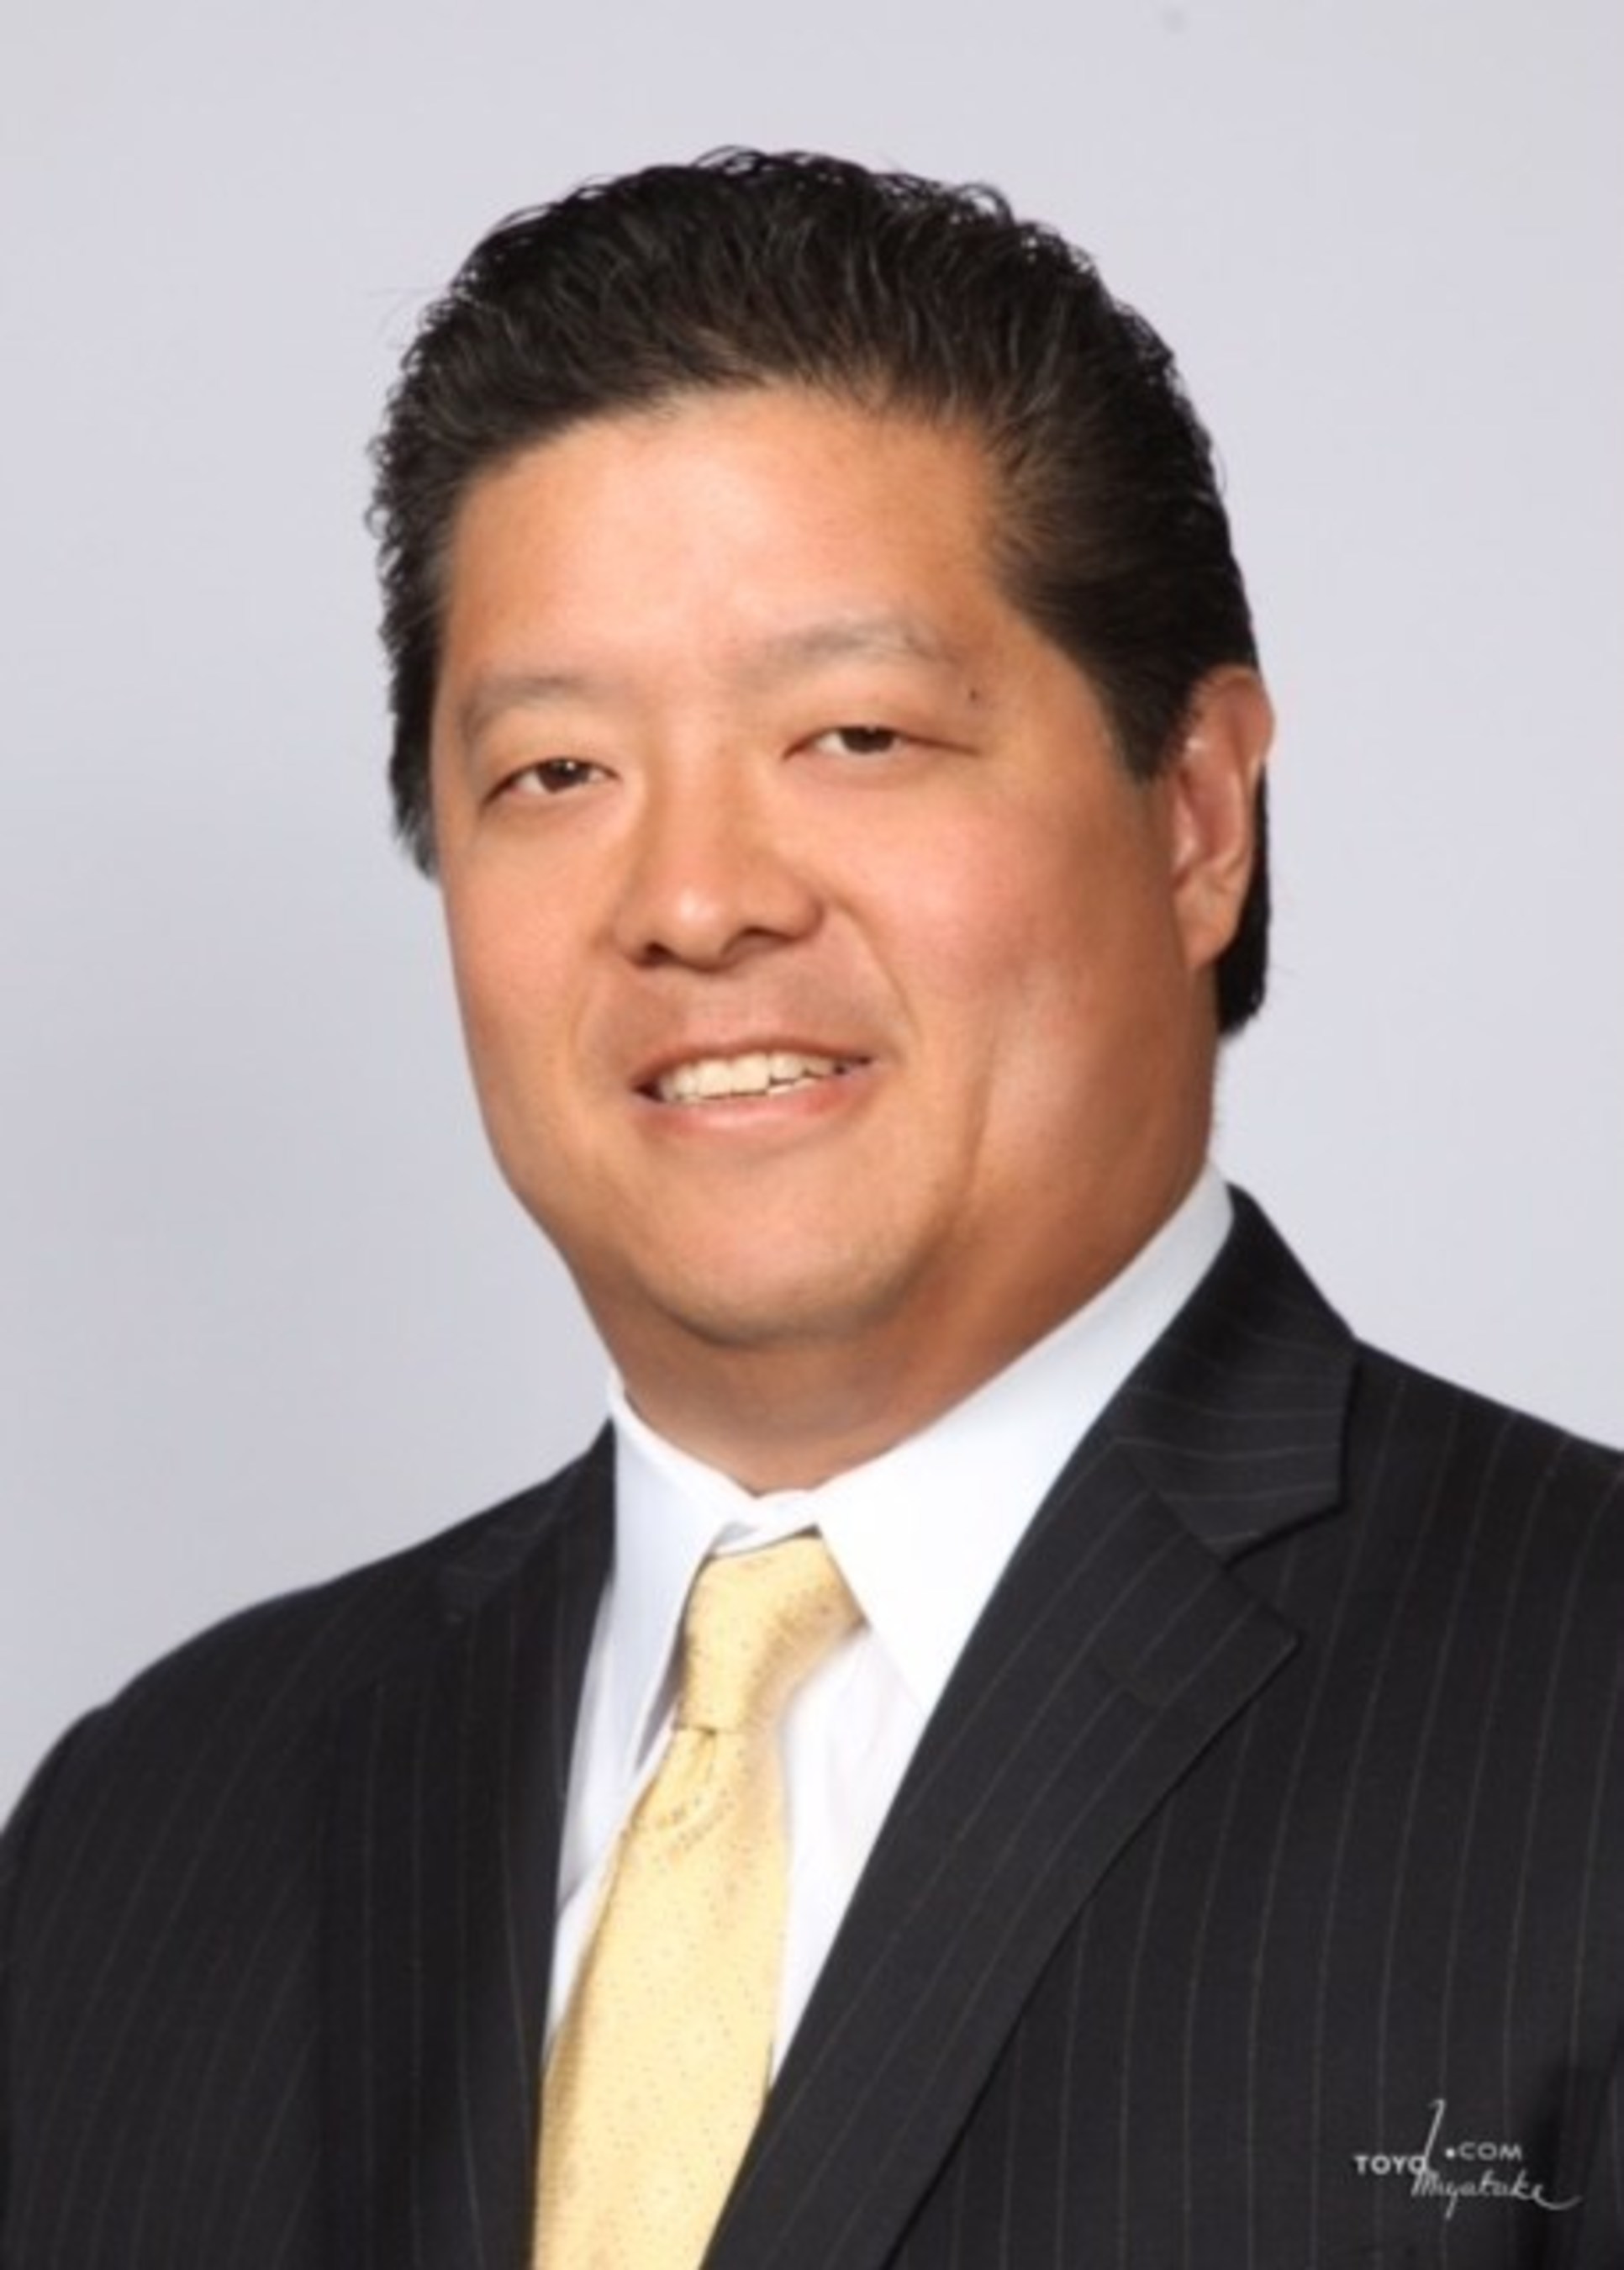 Cathay Bank Announces the Appointment of Mr. Kelly Wu as Executive Vice President, Corporate Banking Division